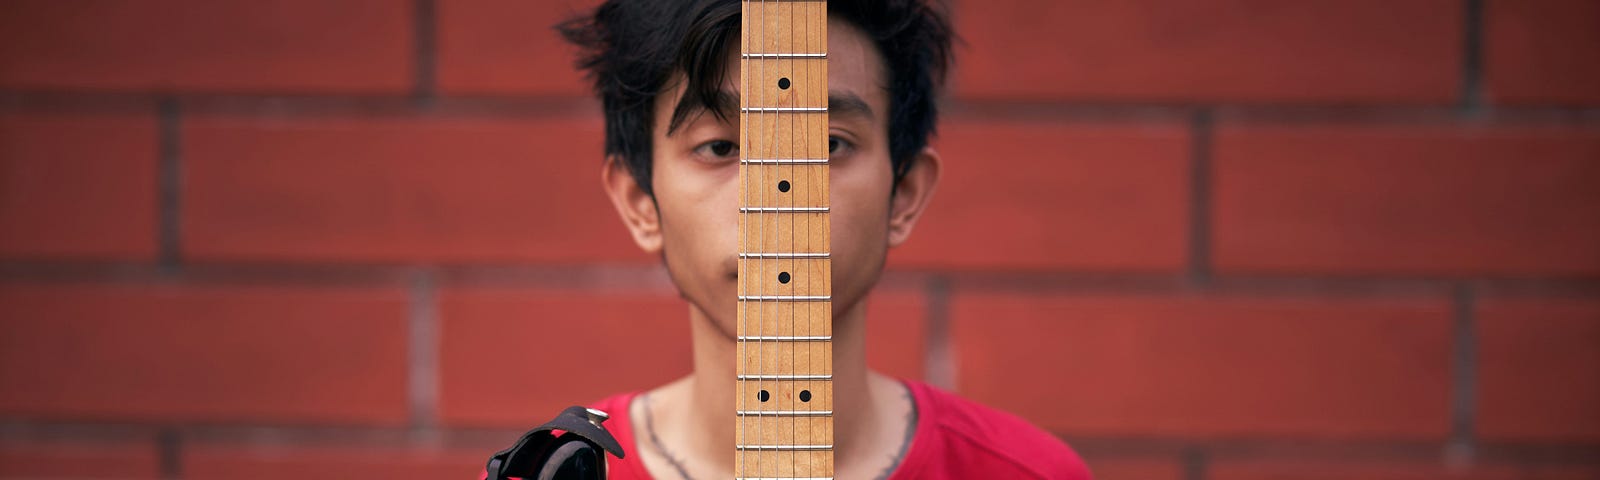 A musician holding up his guitar so it divides one side of his face from the other